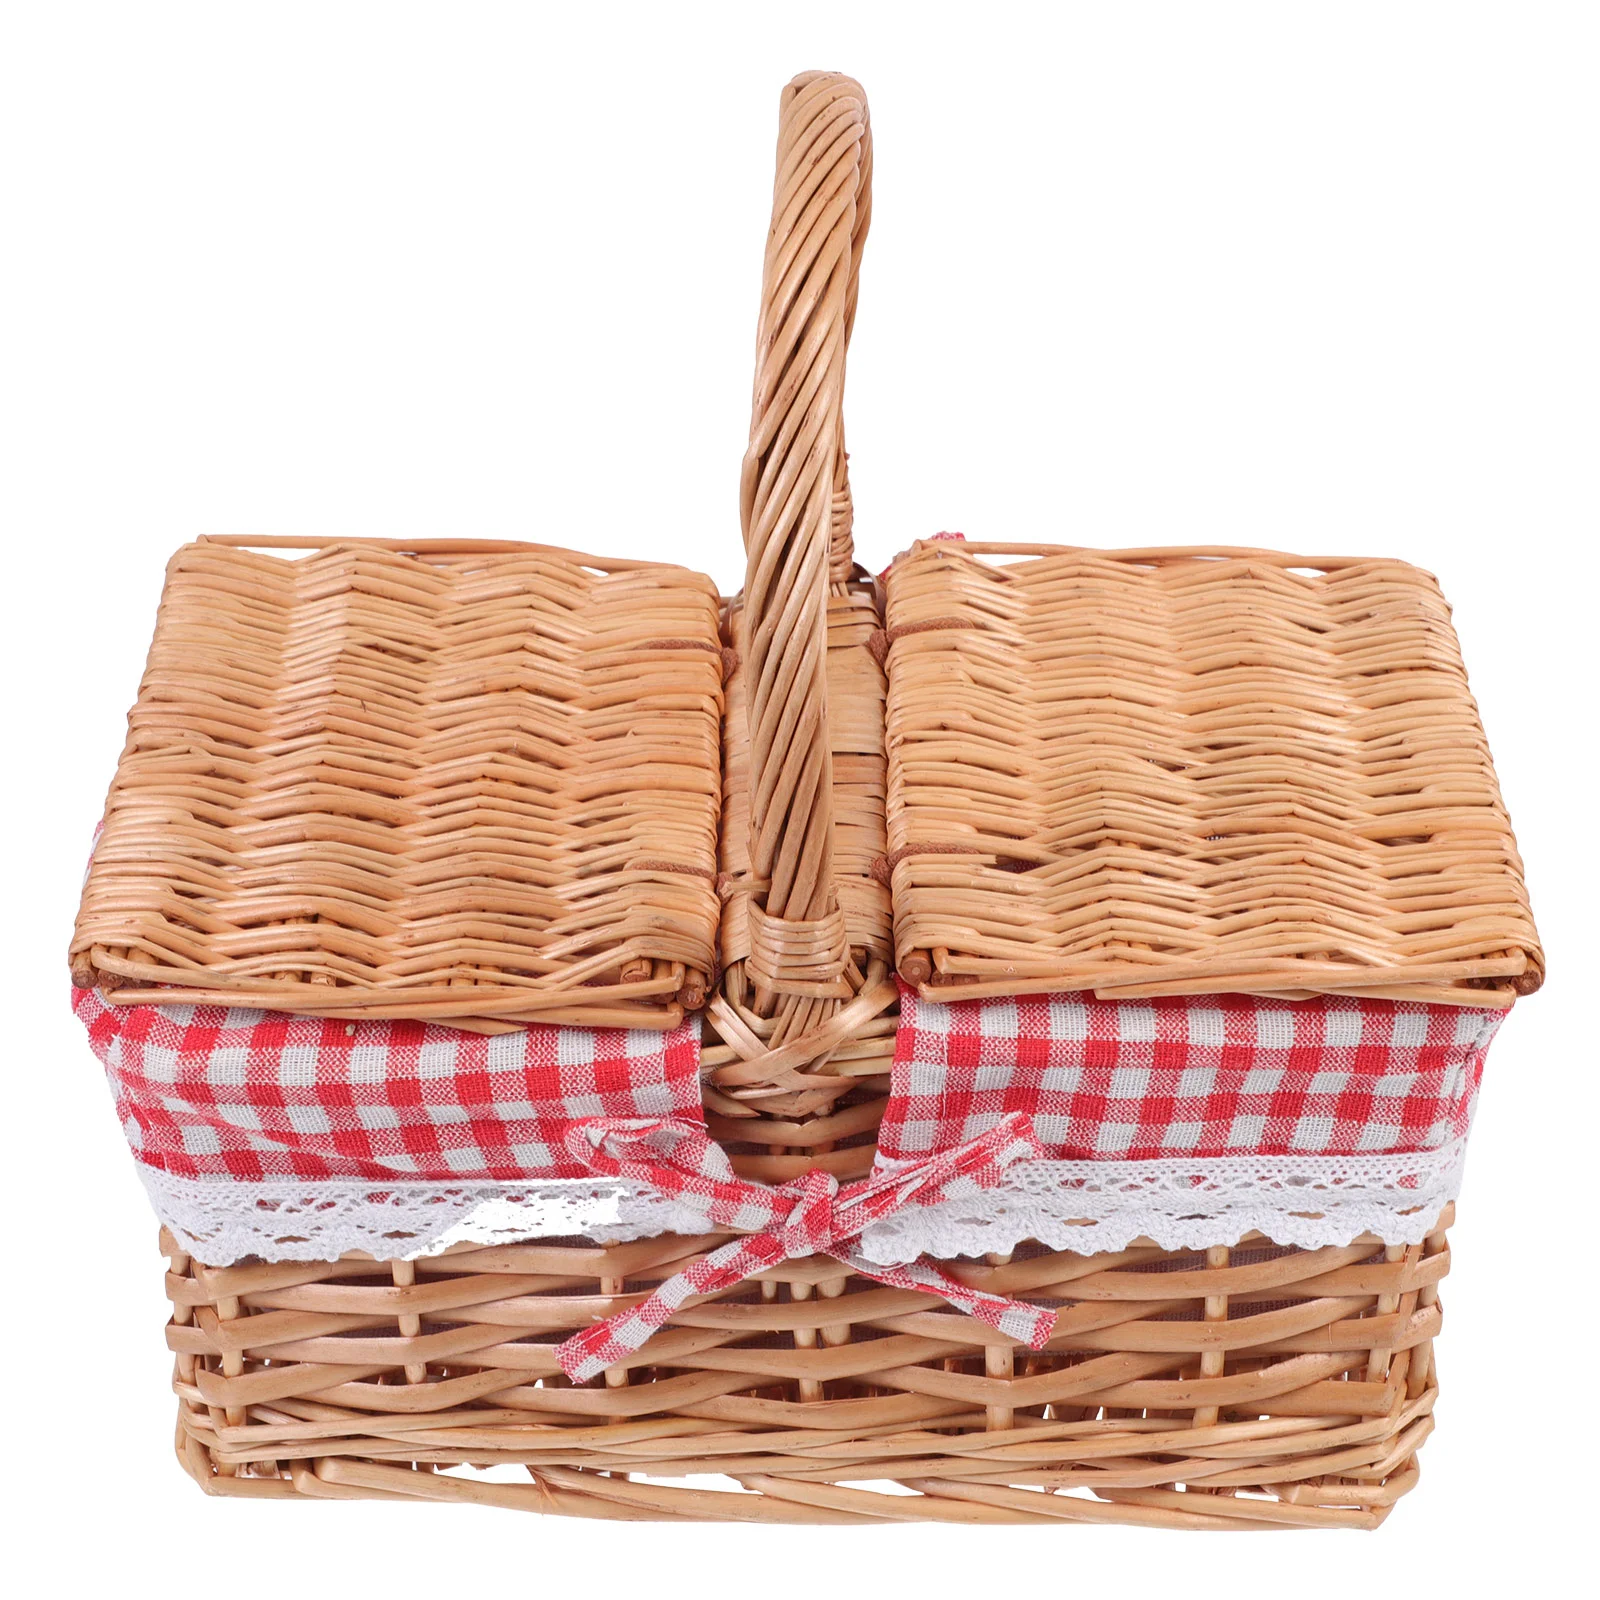 

Outdoor Picnic Basket Sundries Square Baskets Storage Straw Gadgets Container Desktop Organizer Toy Home Fruit Vegetable Arrows